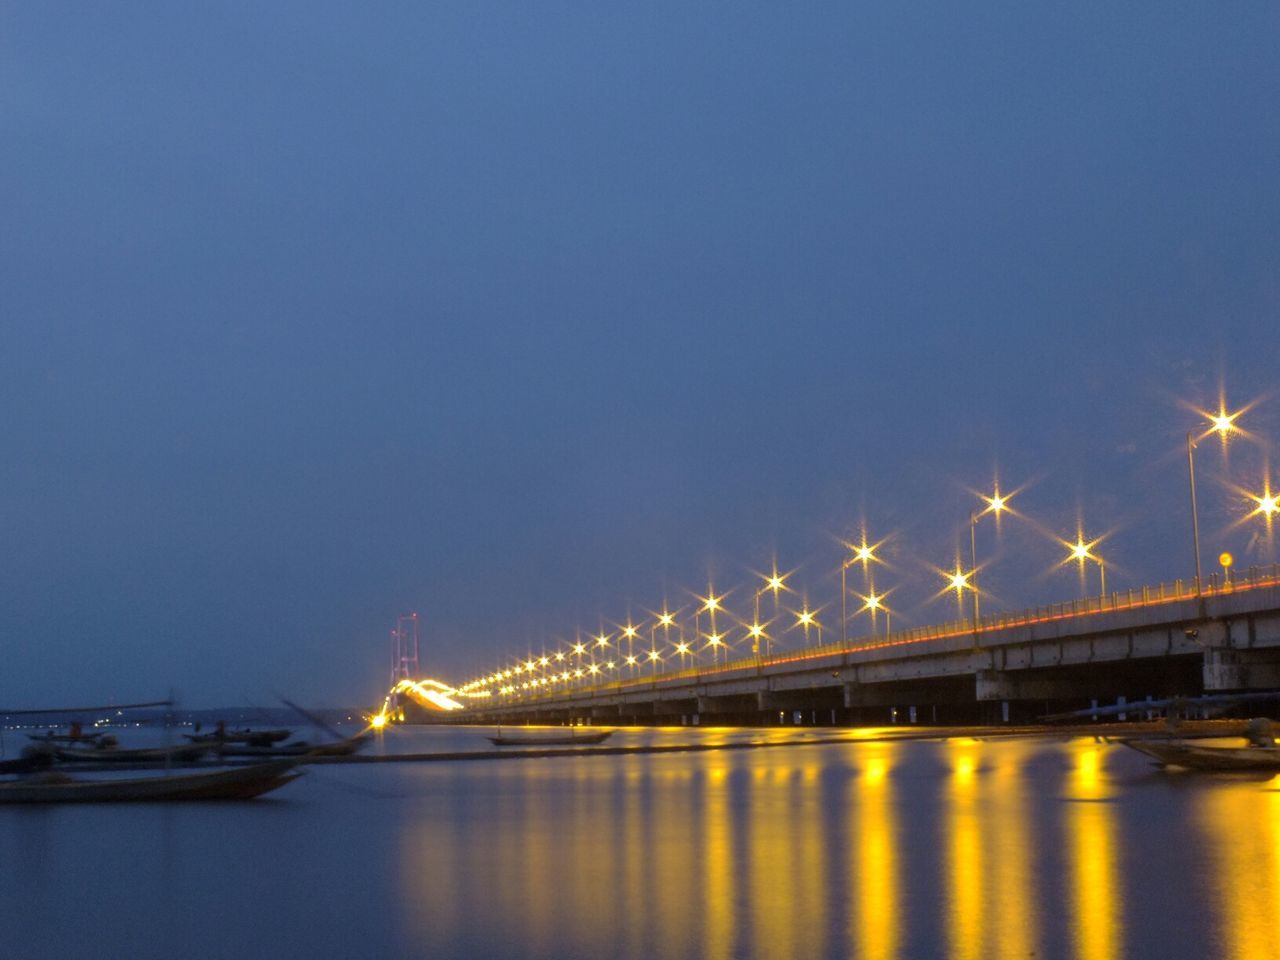 Low angle view of illuminated suramadu bridge over river against clear sky at dusk